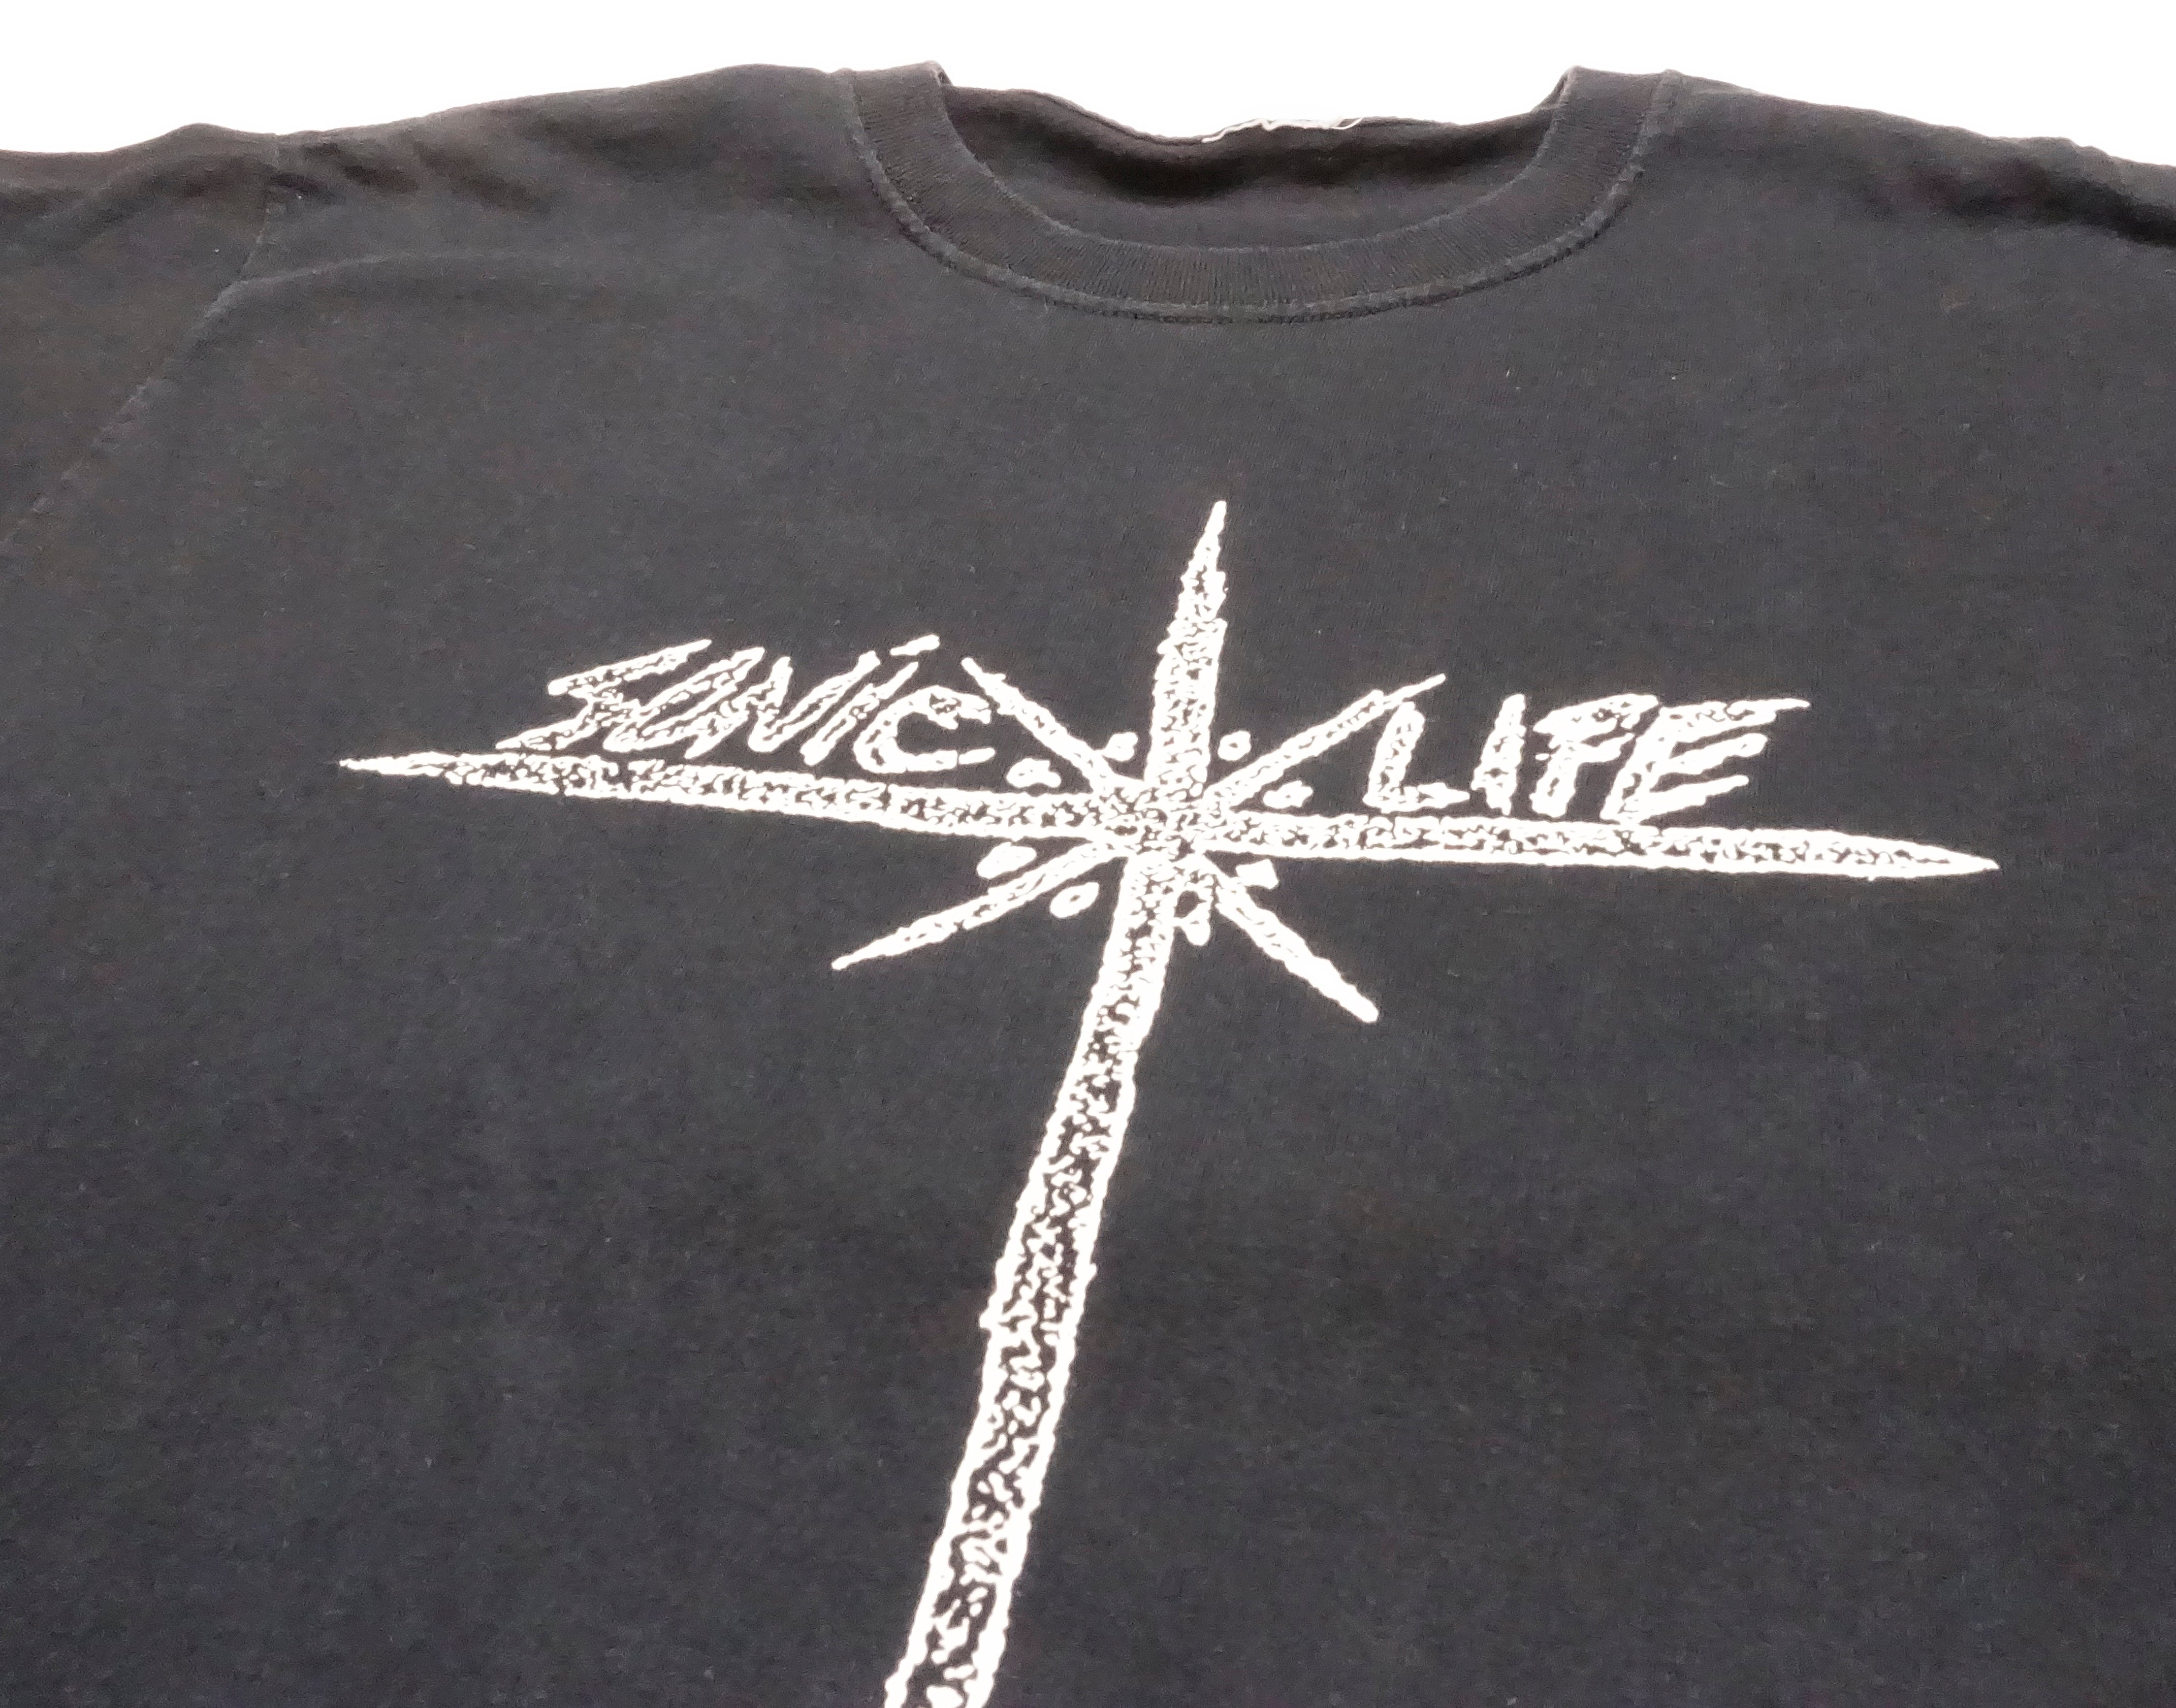 Sonic Youth - Sonic Life Tour Shirt Size Large